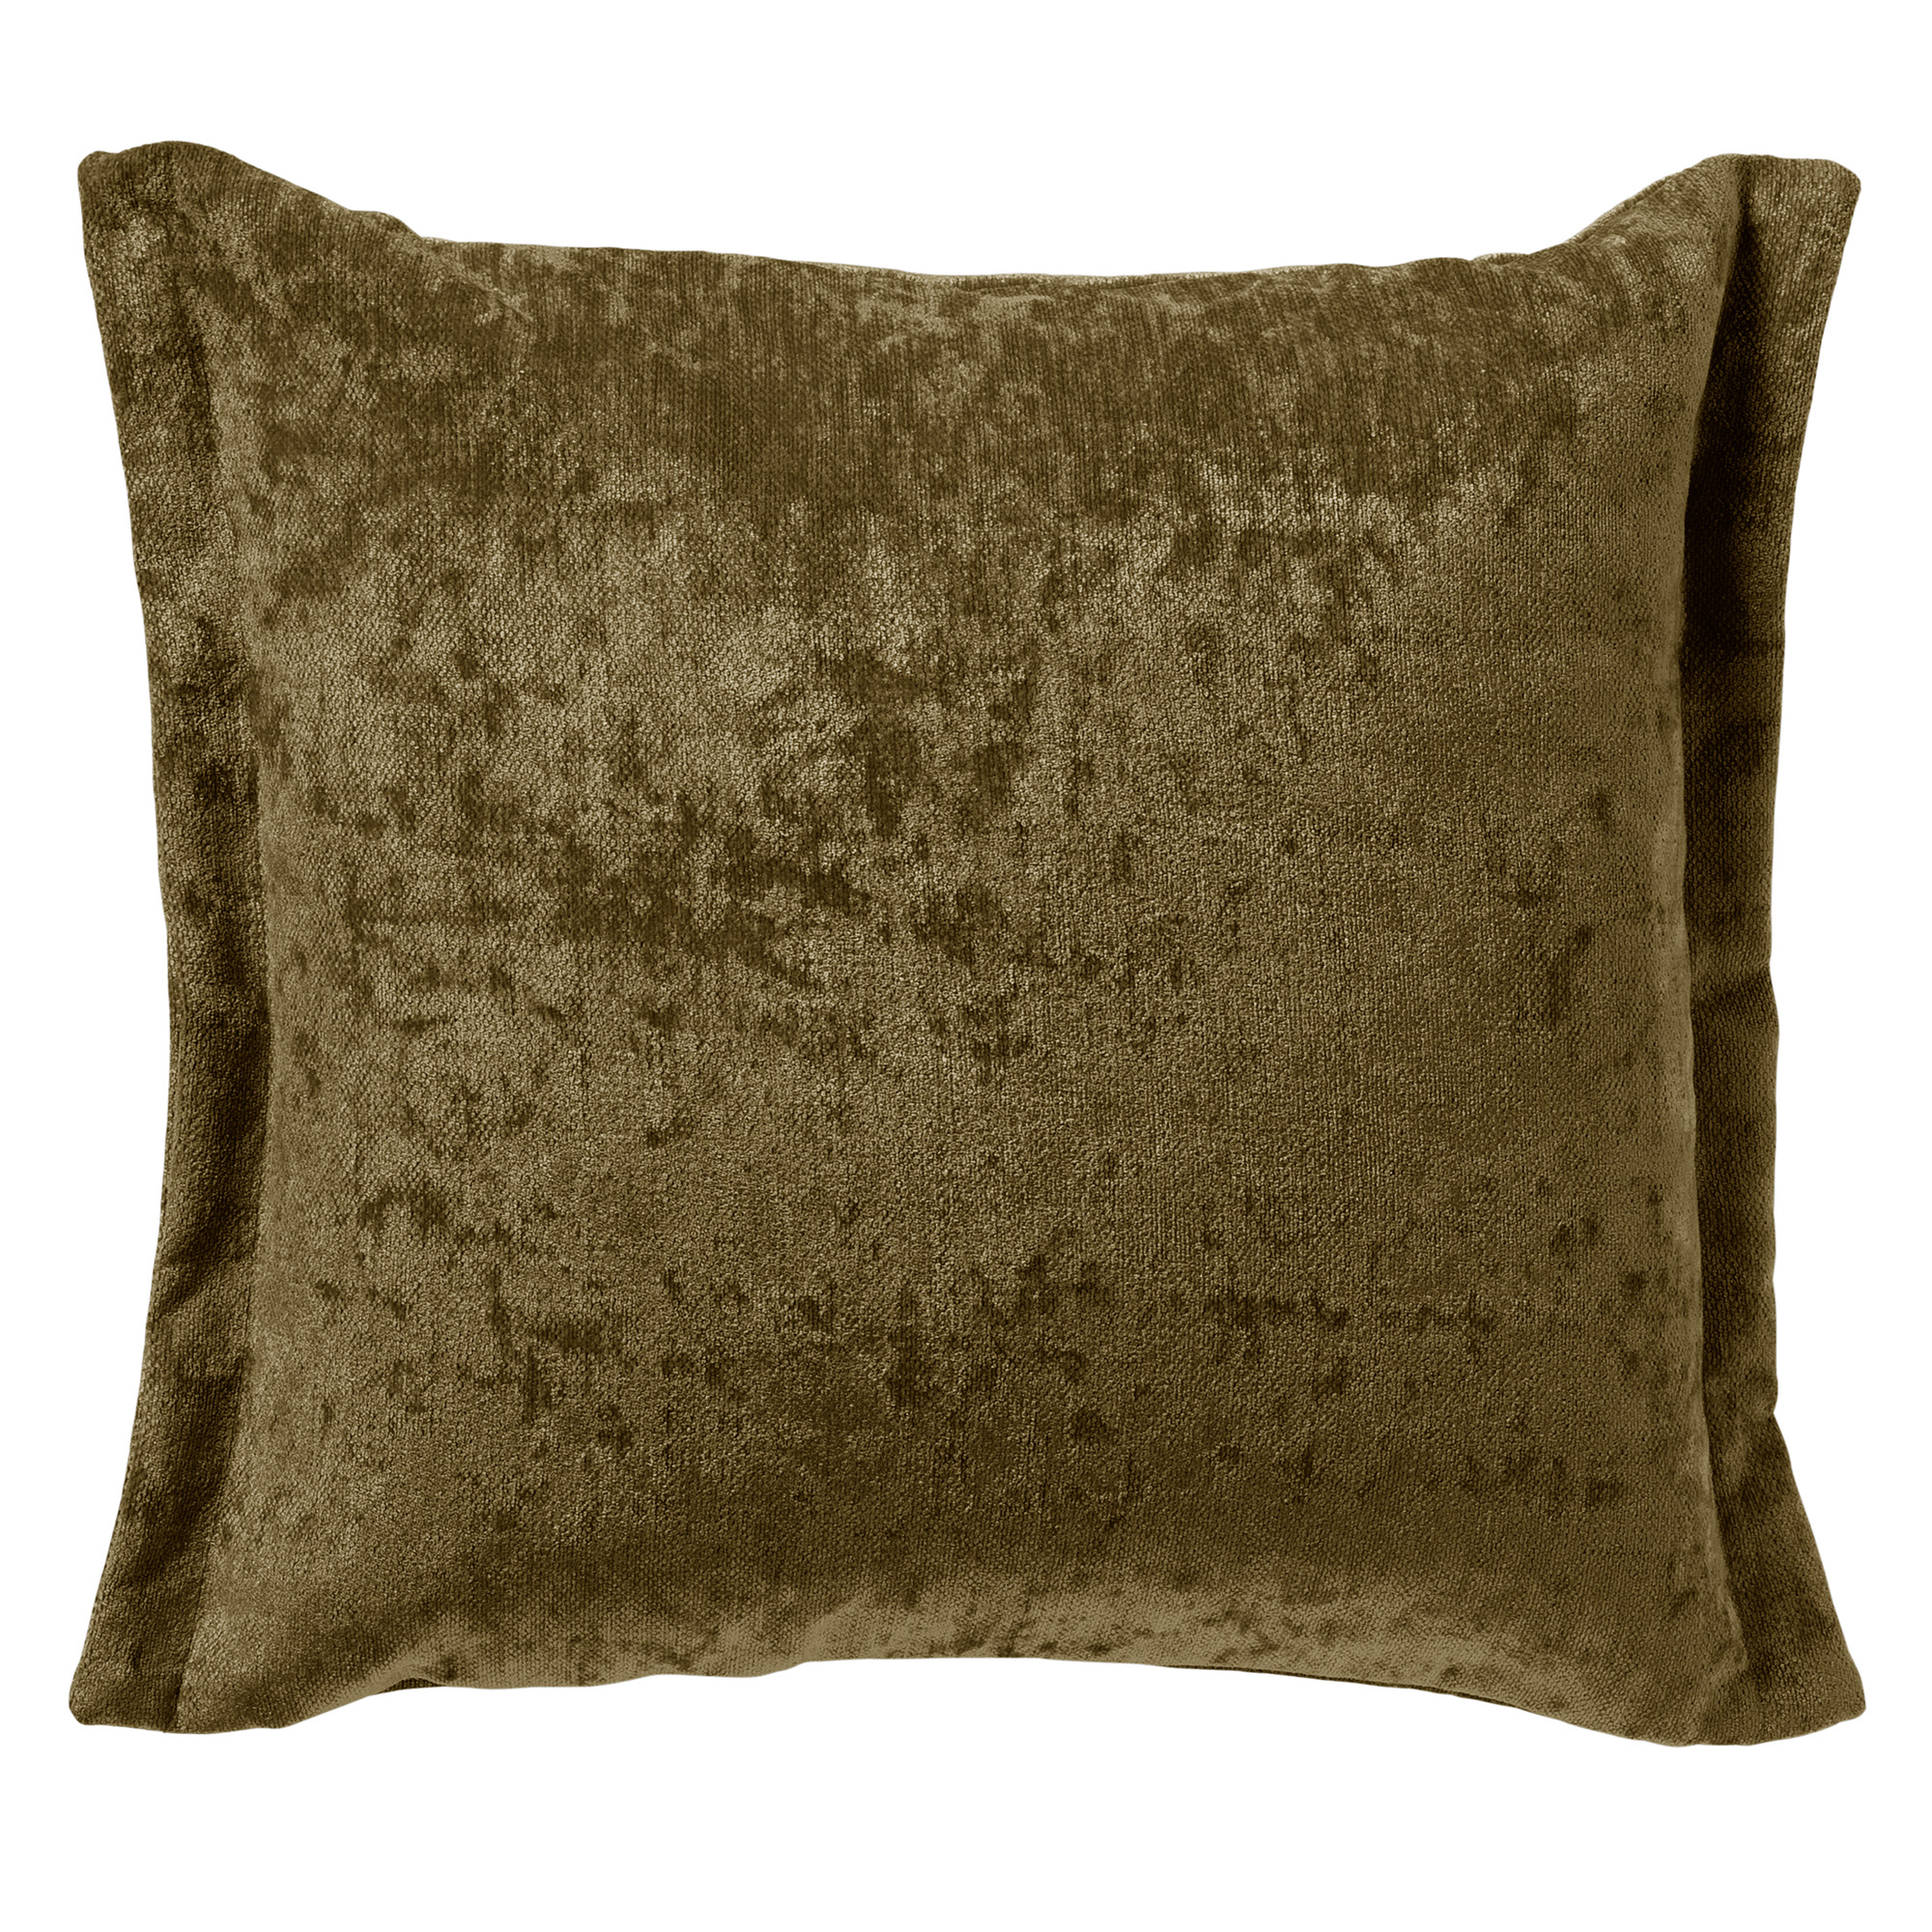 LEWIS - Cushion cover 45x45 cm Military Olive - green